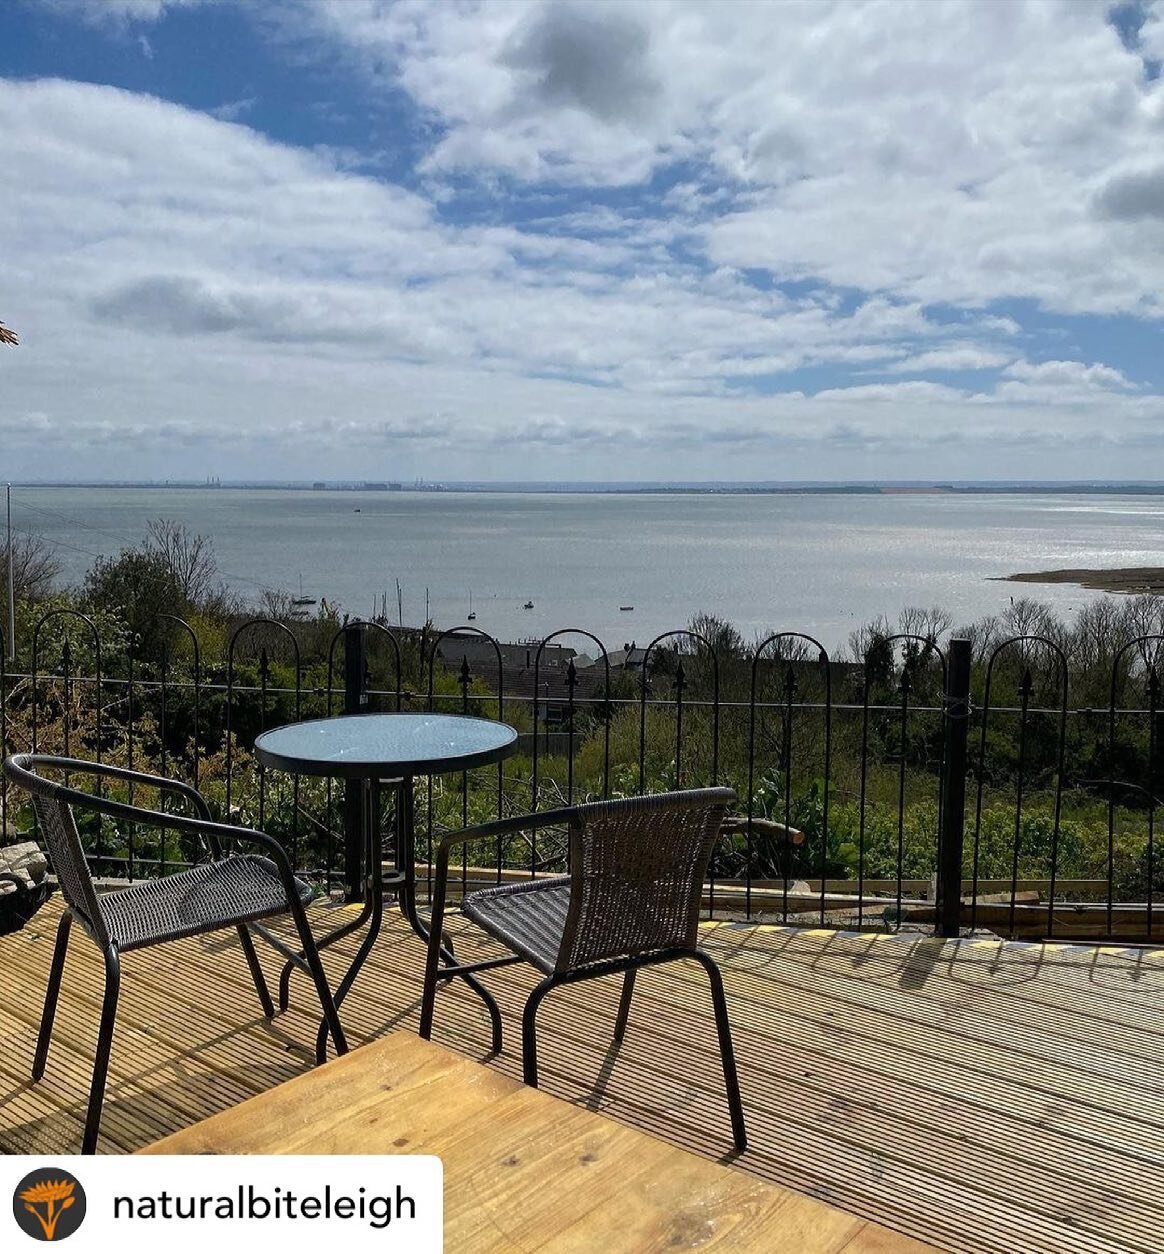 Very best of luck to our friends at @naturalbiteleigh as they open their new garden terrace today and welcome customers to dine with them outside. We had an exclusive taste testing yesterday and it was fantastic!

Just look at that view! 😍

#welcome